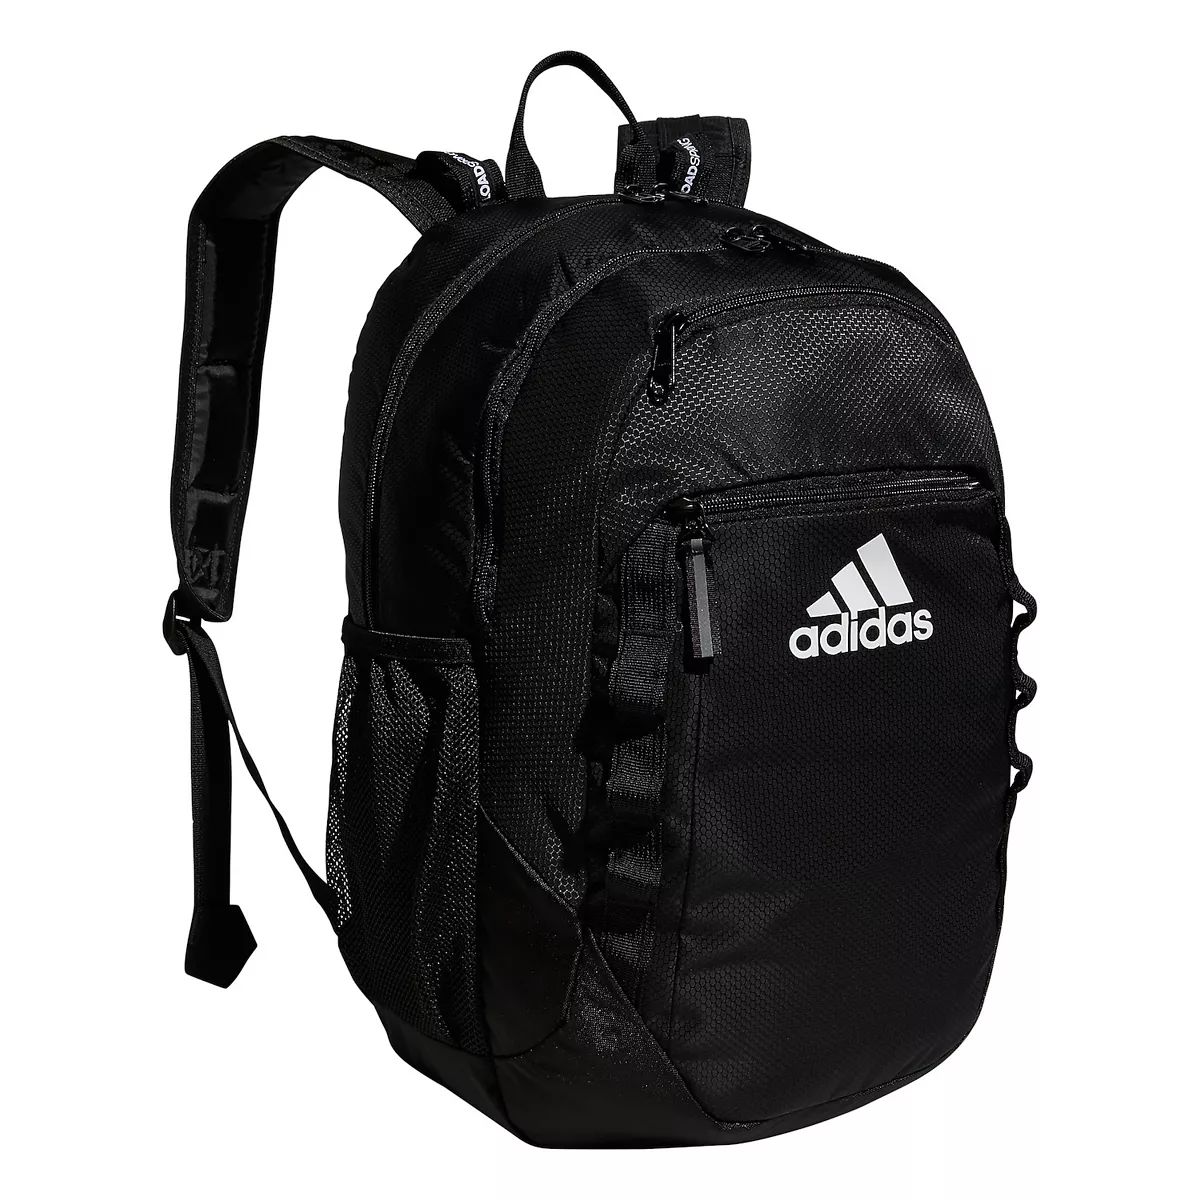 adidas Excel 6 Backpack | Kohl's